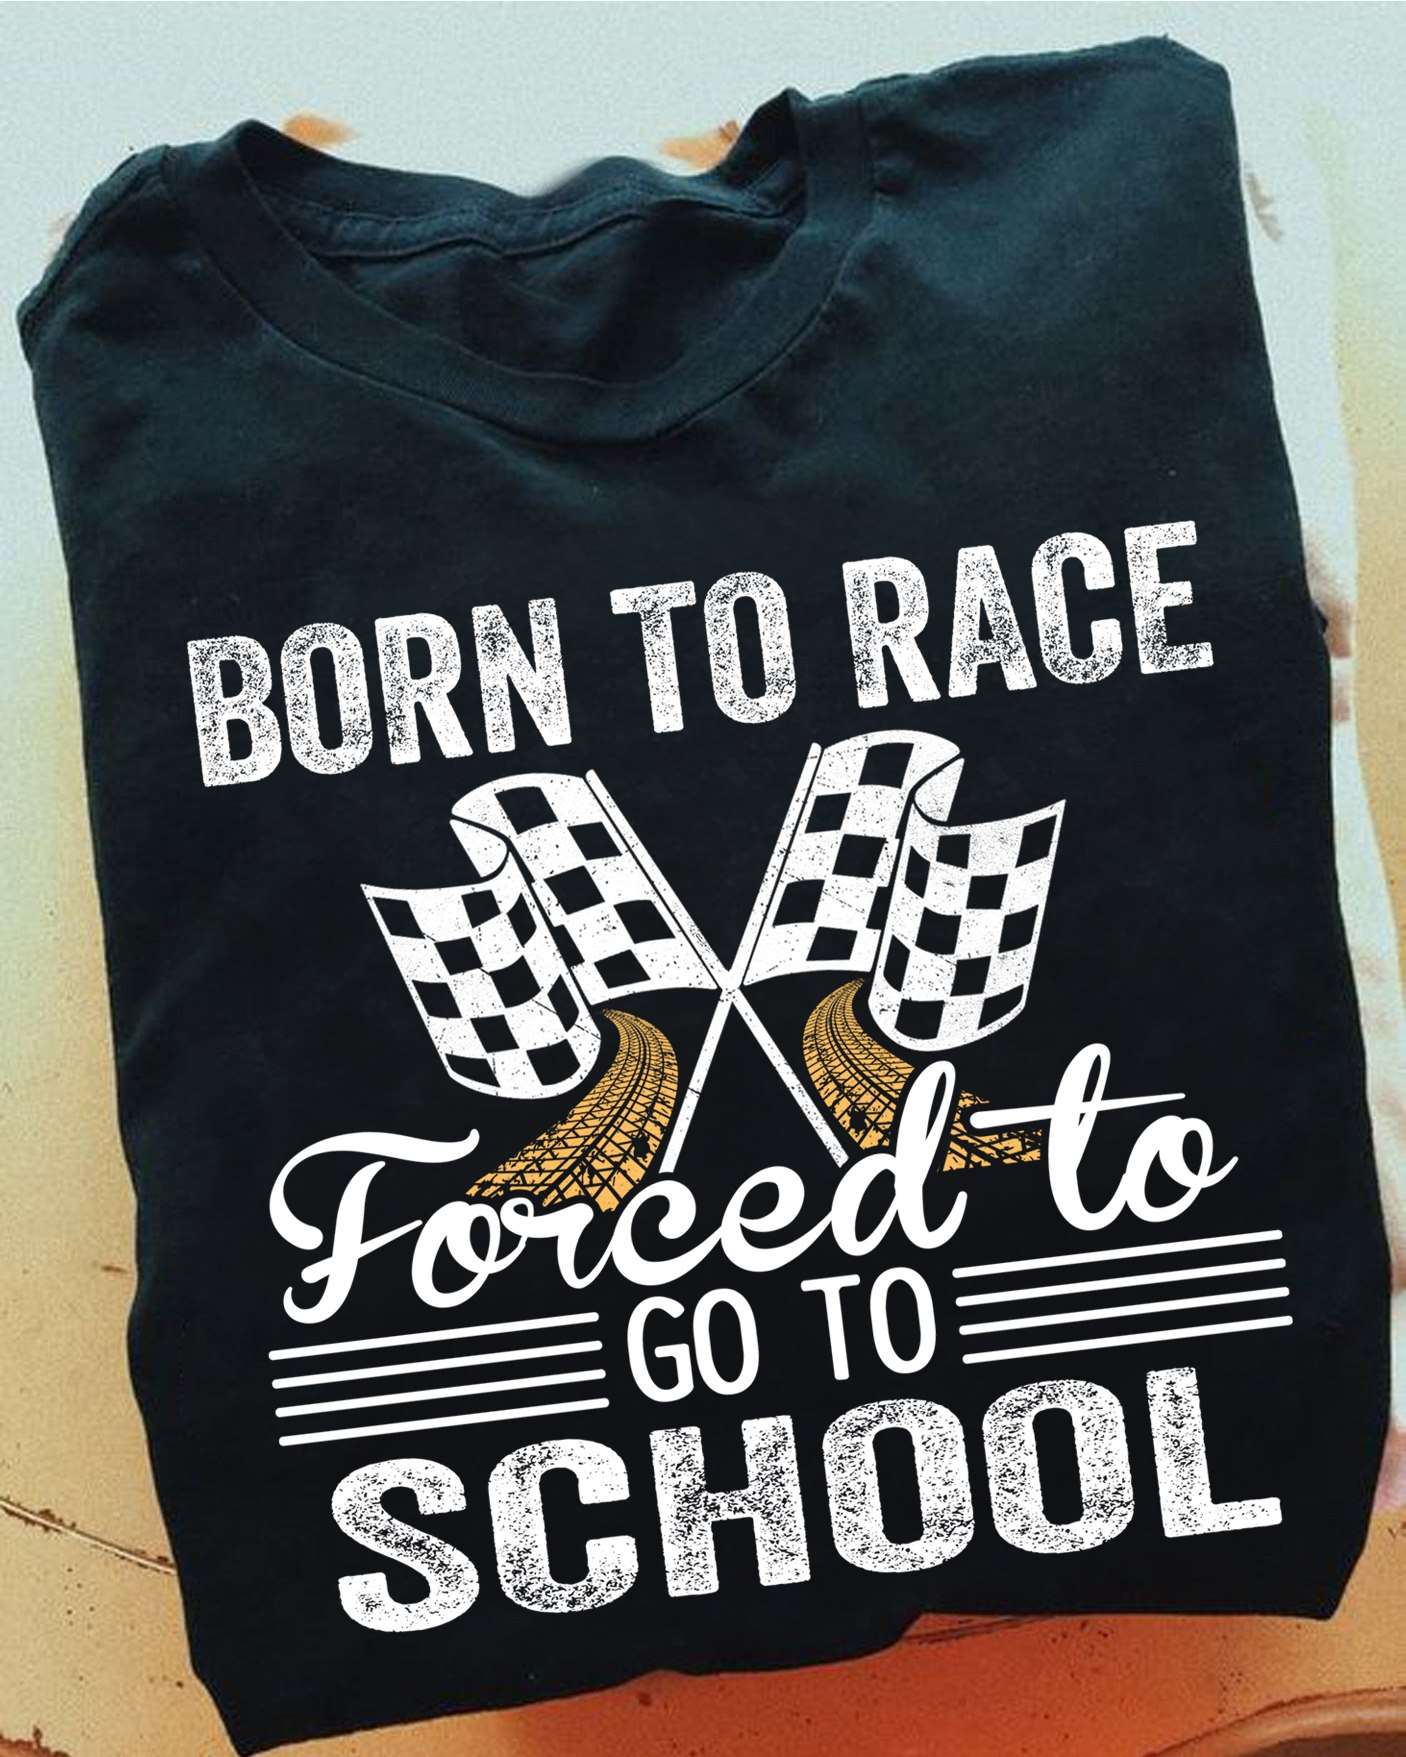 Born to race, forced to go to school - Racing the hobby